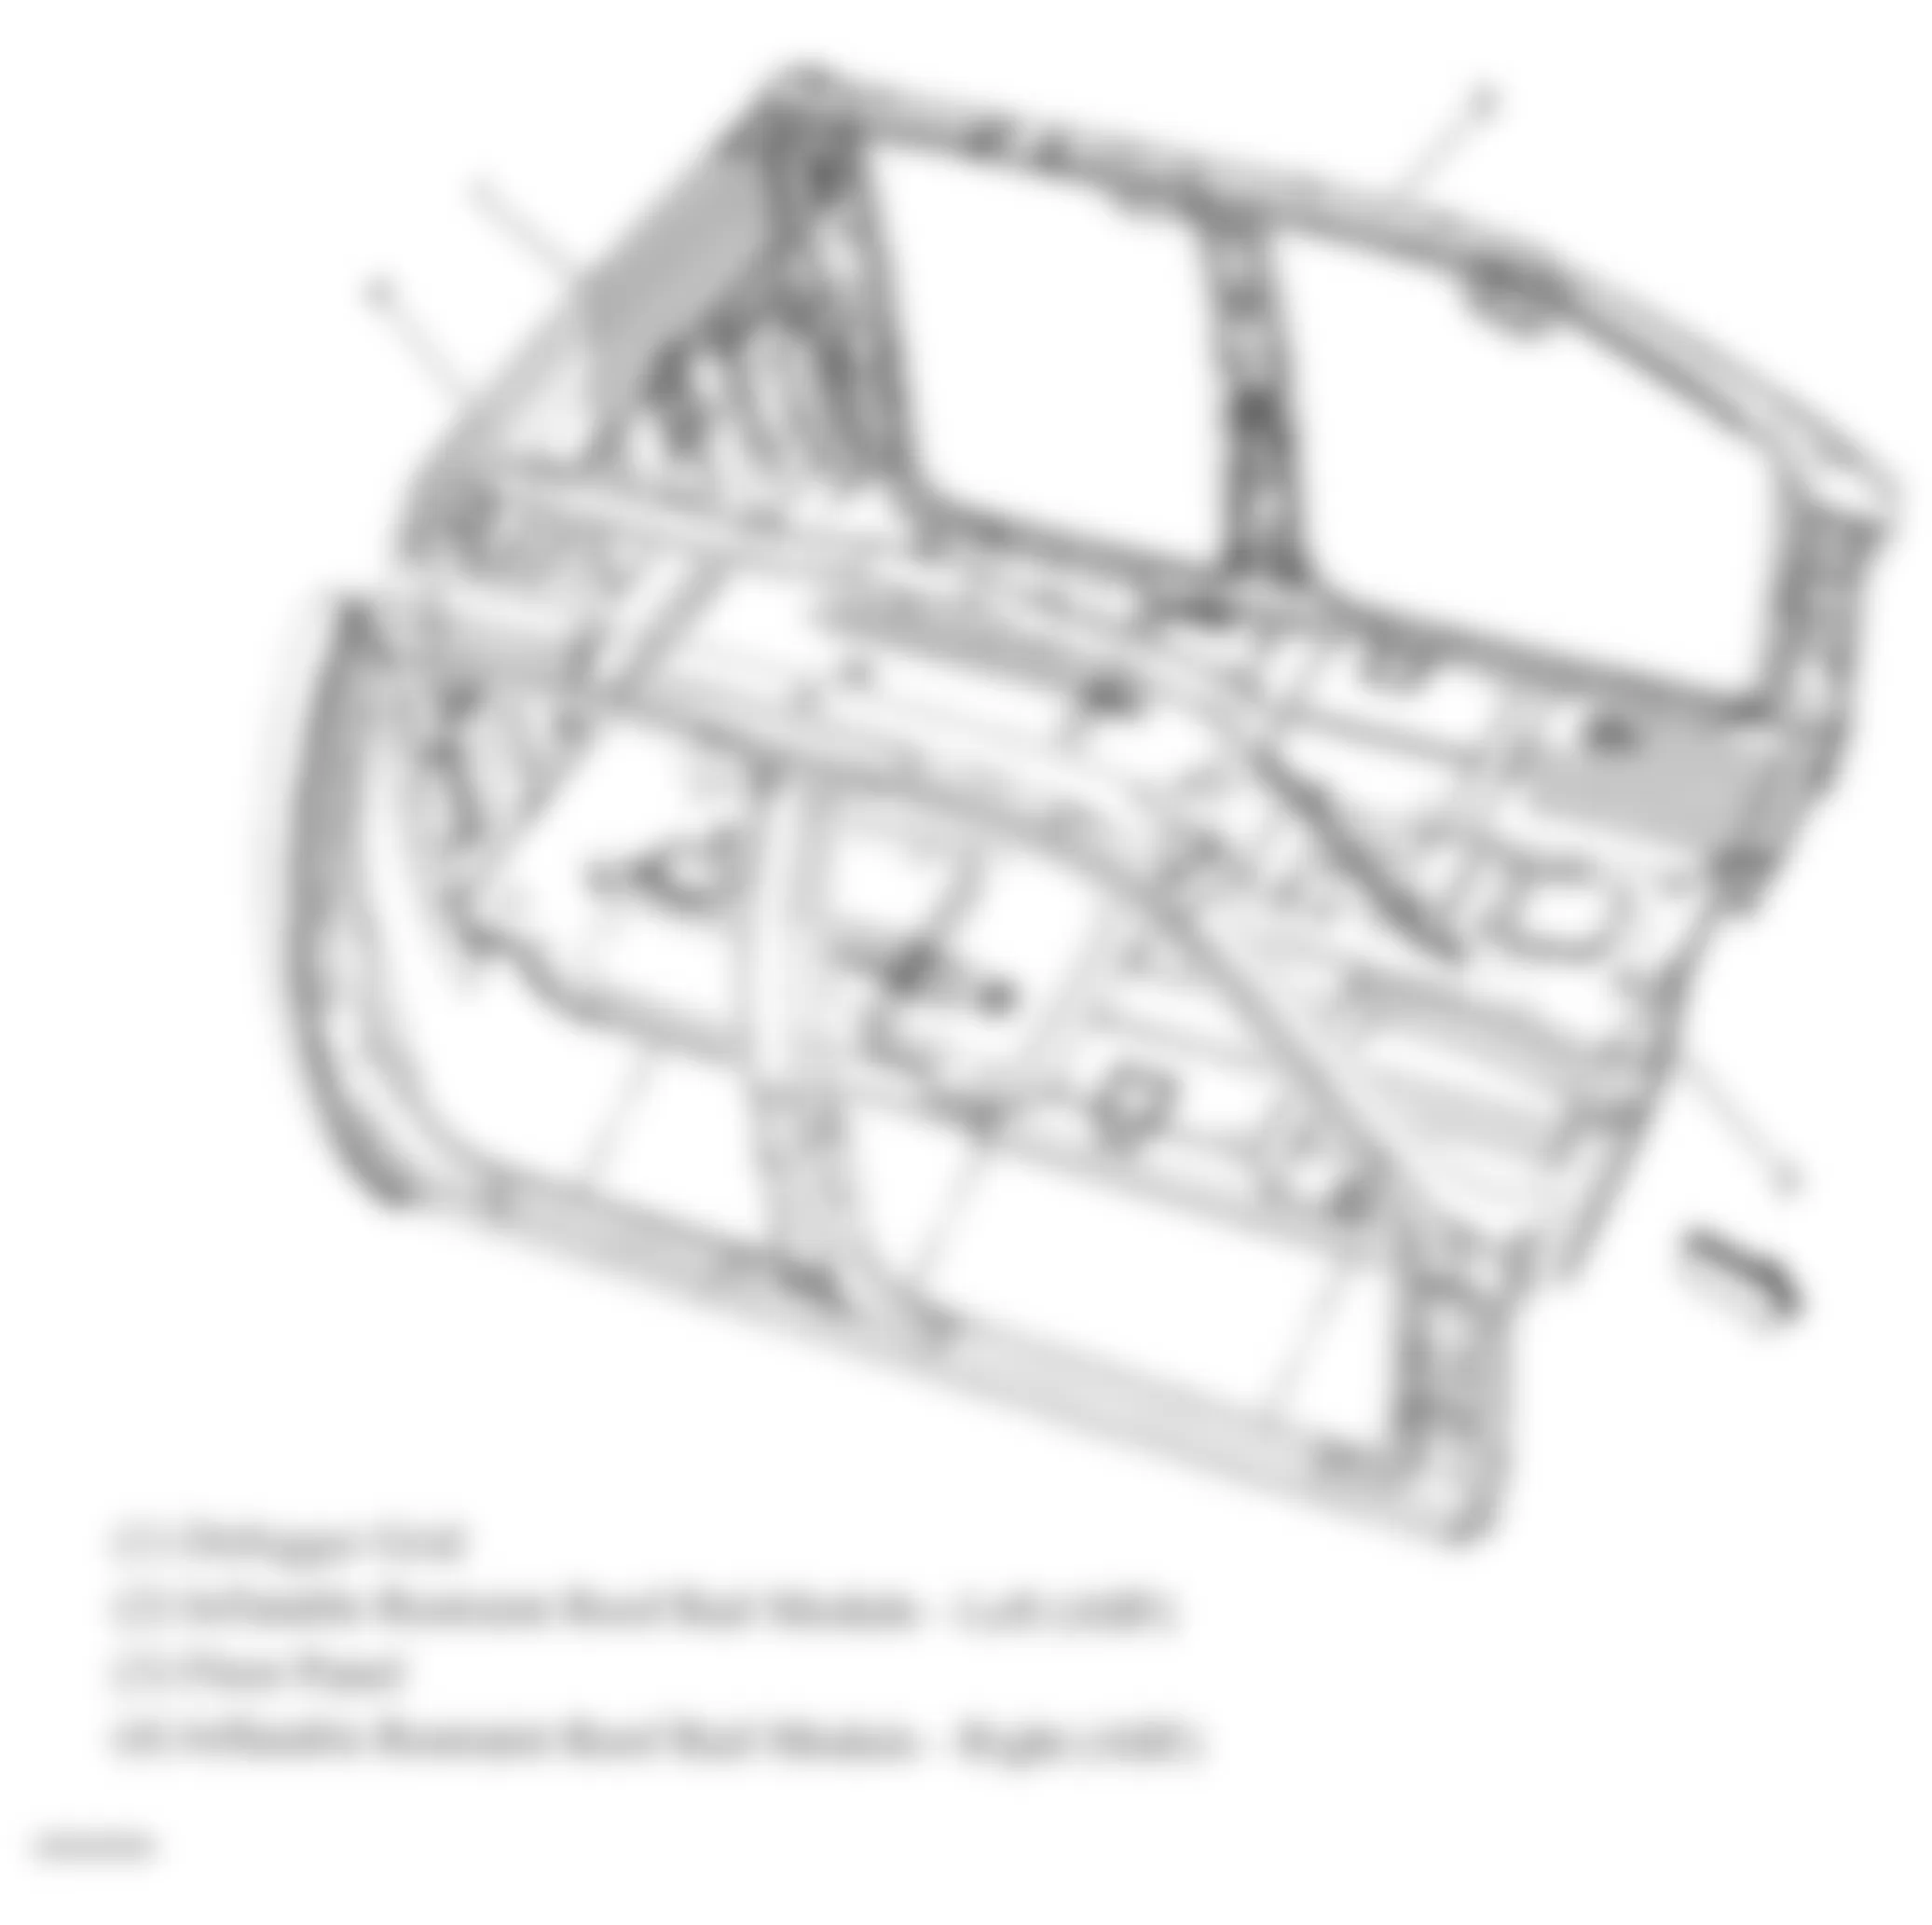 GMC Sierra 1500 2007 - Component Locations -  Roof Rail Air Bags (Extended Cab & Crew Cab)